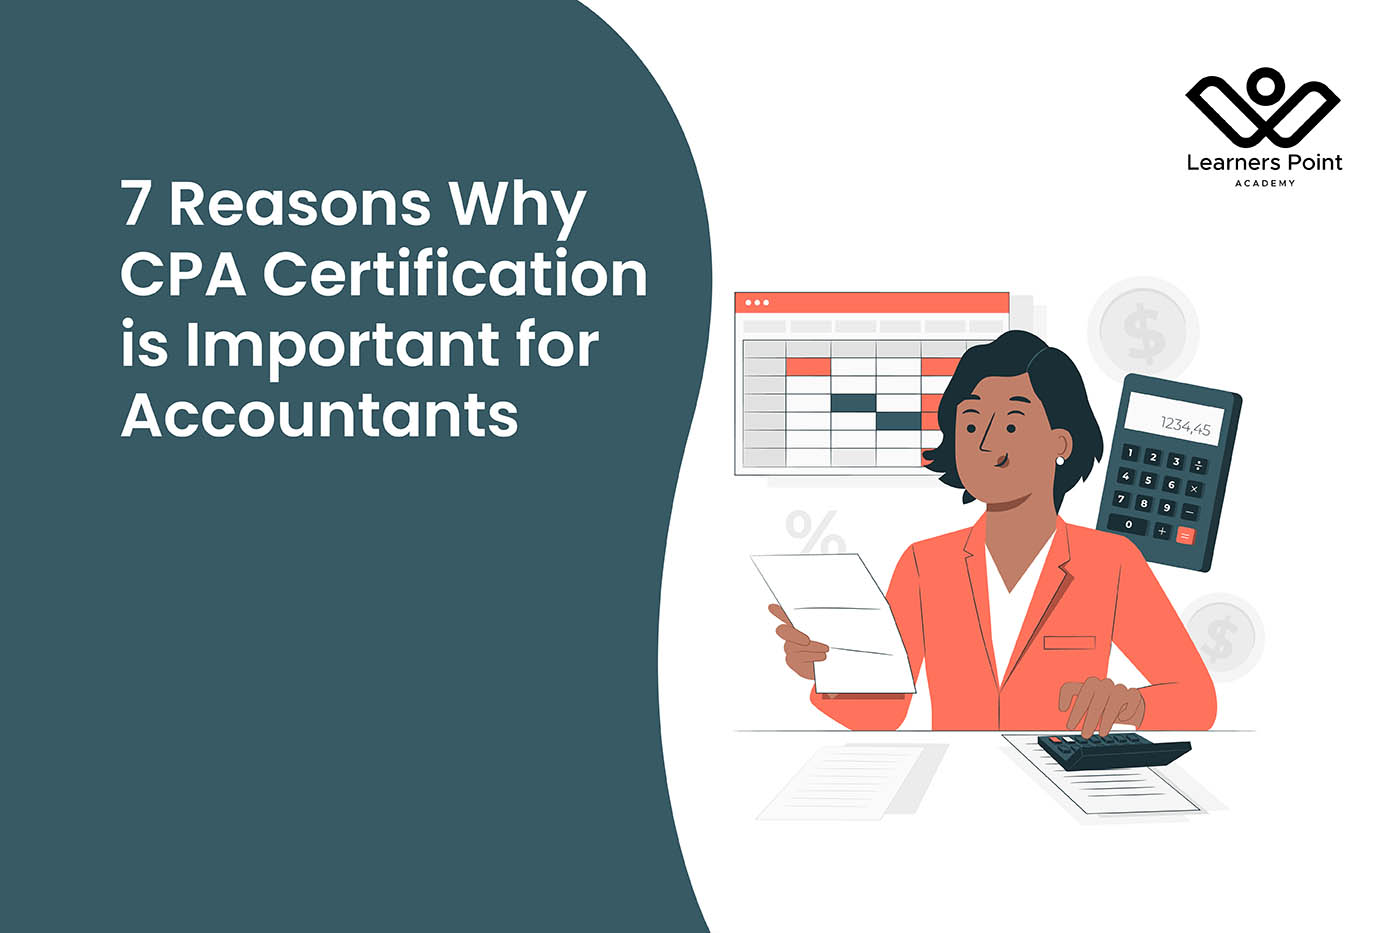 7 Reasons Why CPA Certification is Important for Accountants